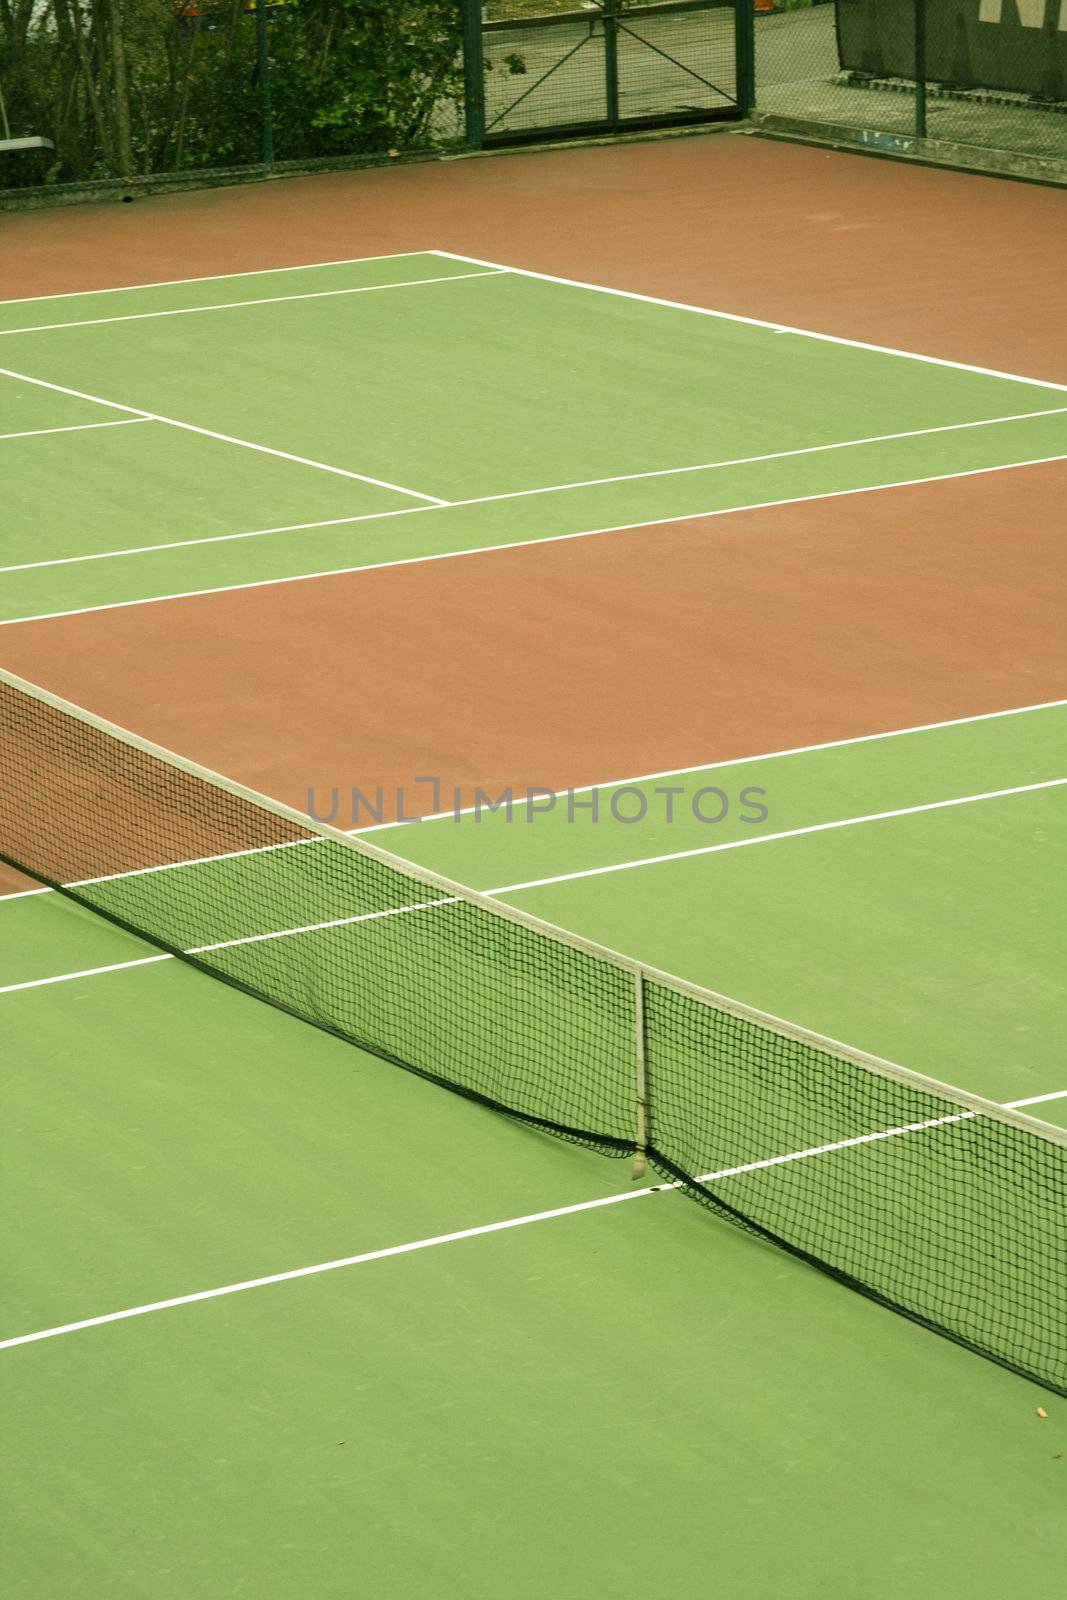 It is a stie for people to play tennis